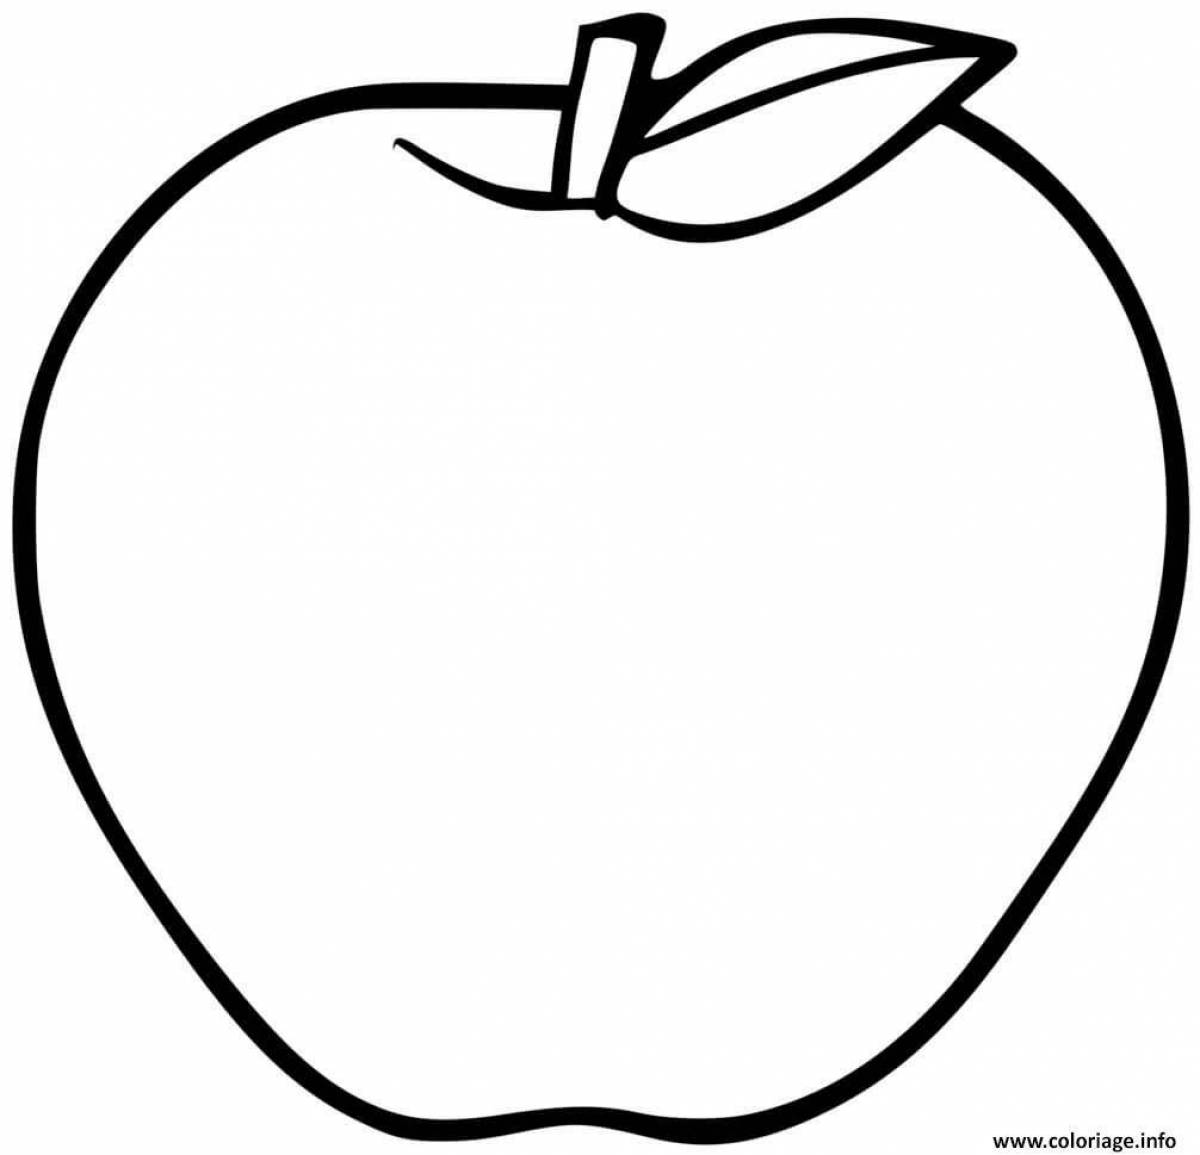 Adorable apple coloring book for kids